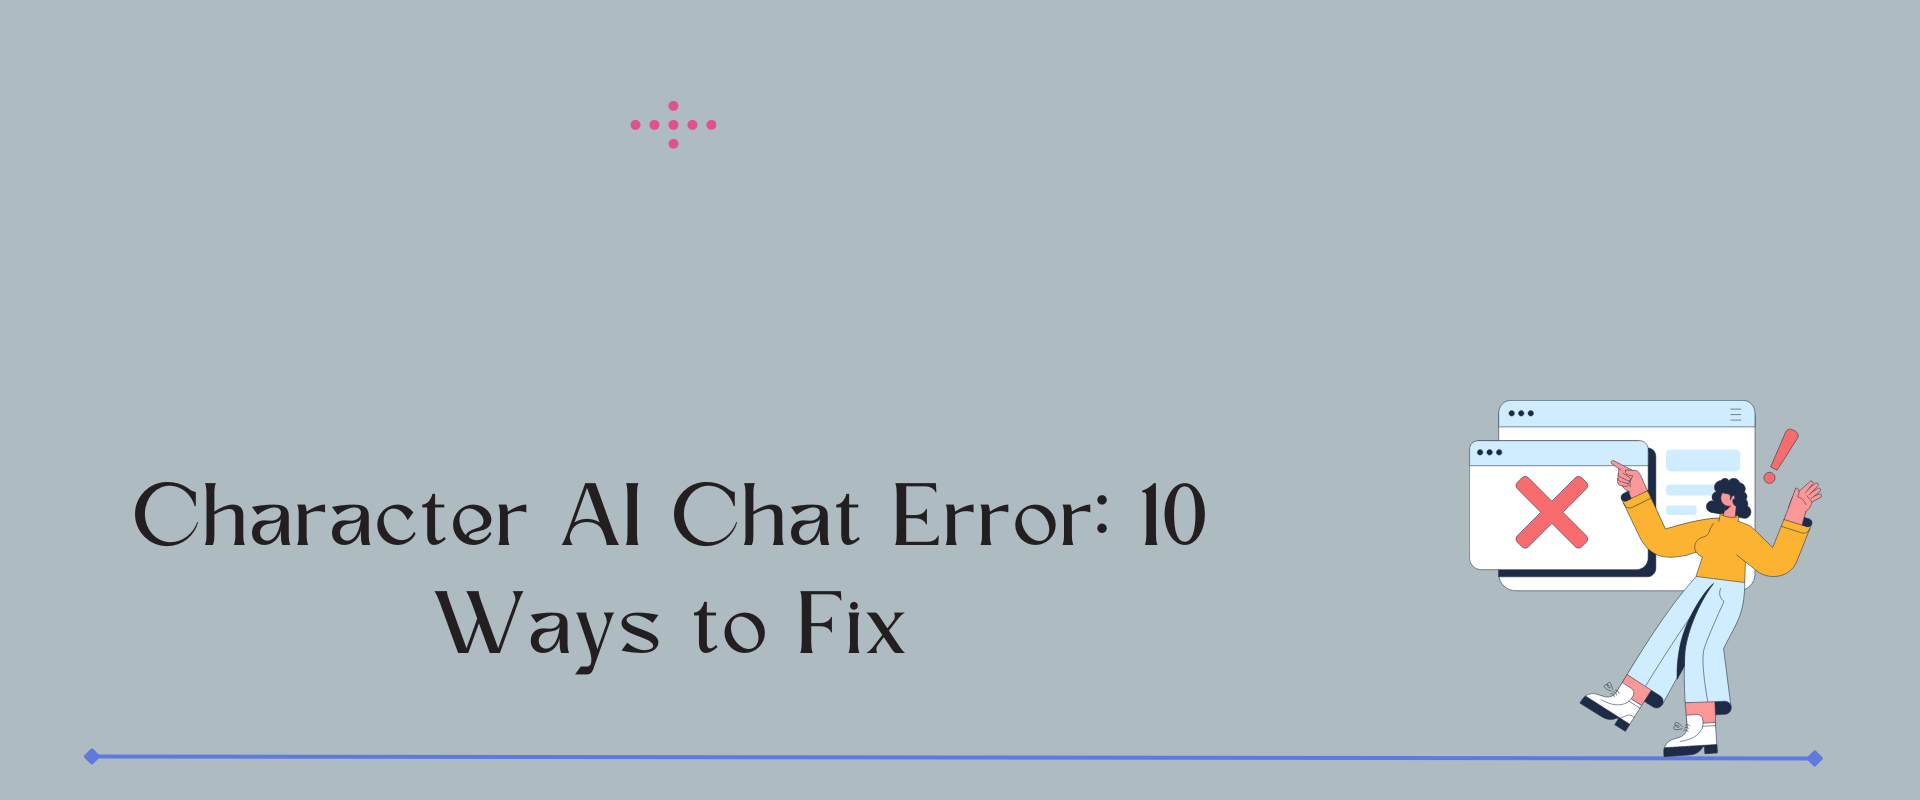 Character AI Chat Error: Amazing 10 Ways to Fix